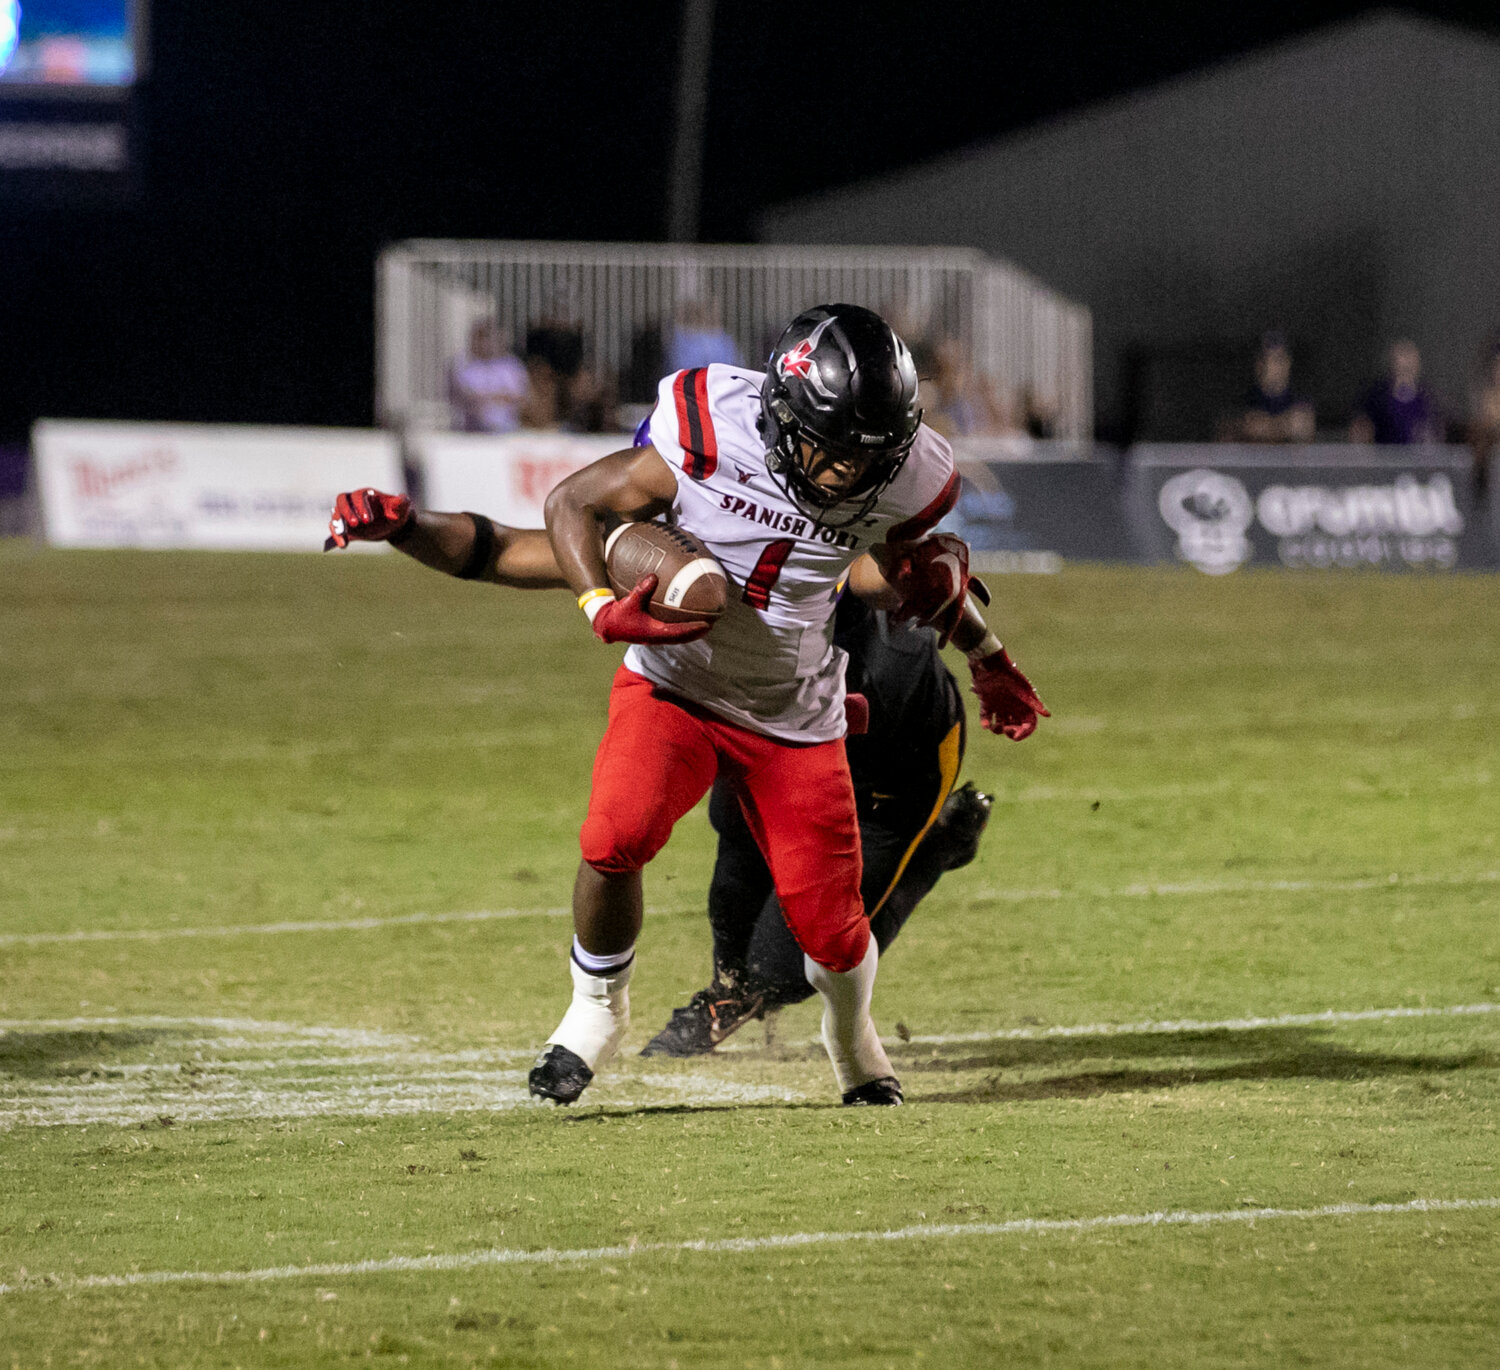 Spanish Fort junior Nehemiah Hixon (1) sheds a Daphne defender after securing a catch on Friday, Sept. 29, during the Toros’ non-region game against the Trojans on the road. At the end of the season, Hixon registered 1,202 all-purpose yards with 7 total touchdowns.